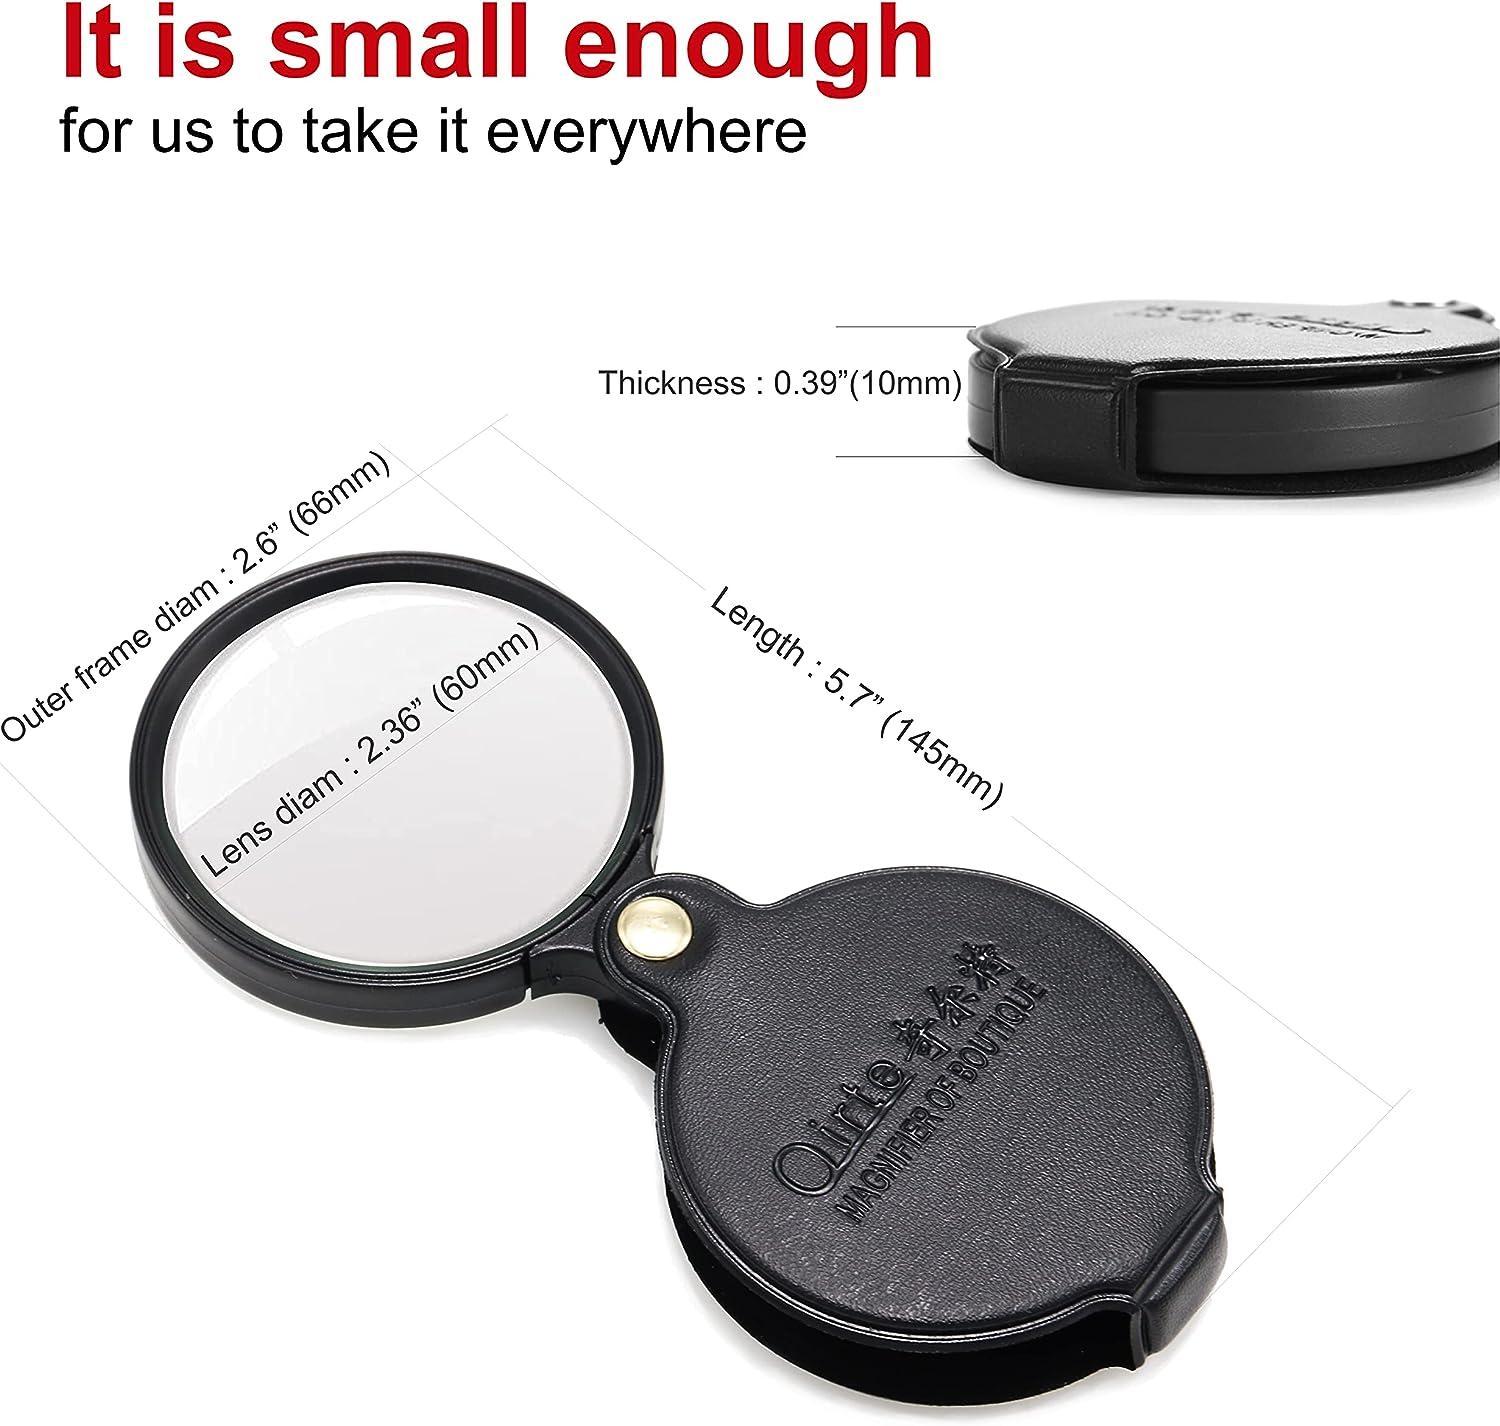 Multi-Function Pocket Magnifier 5-in-1 at